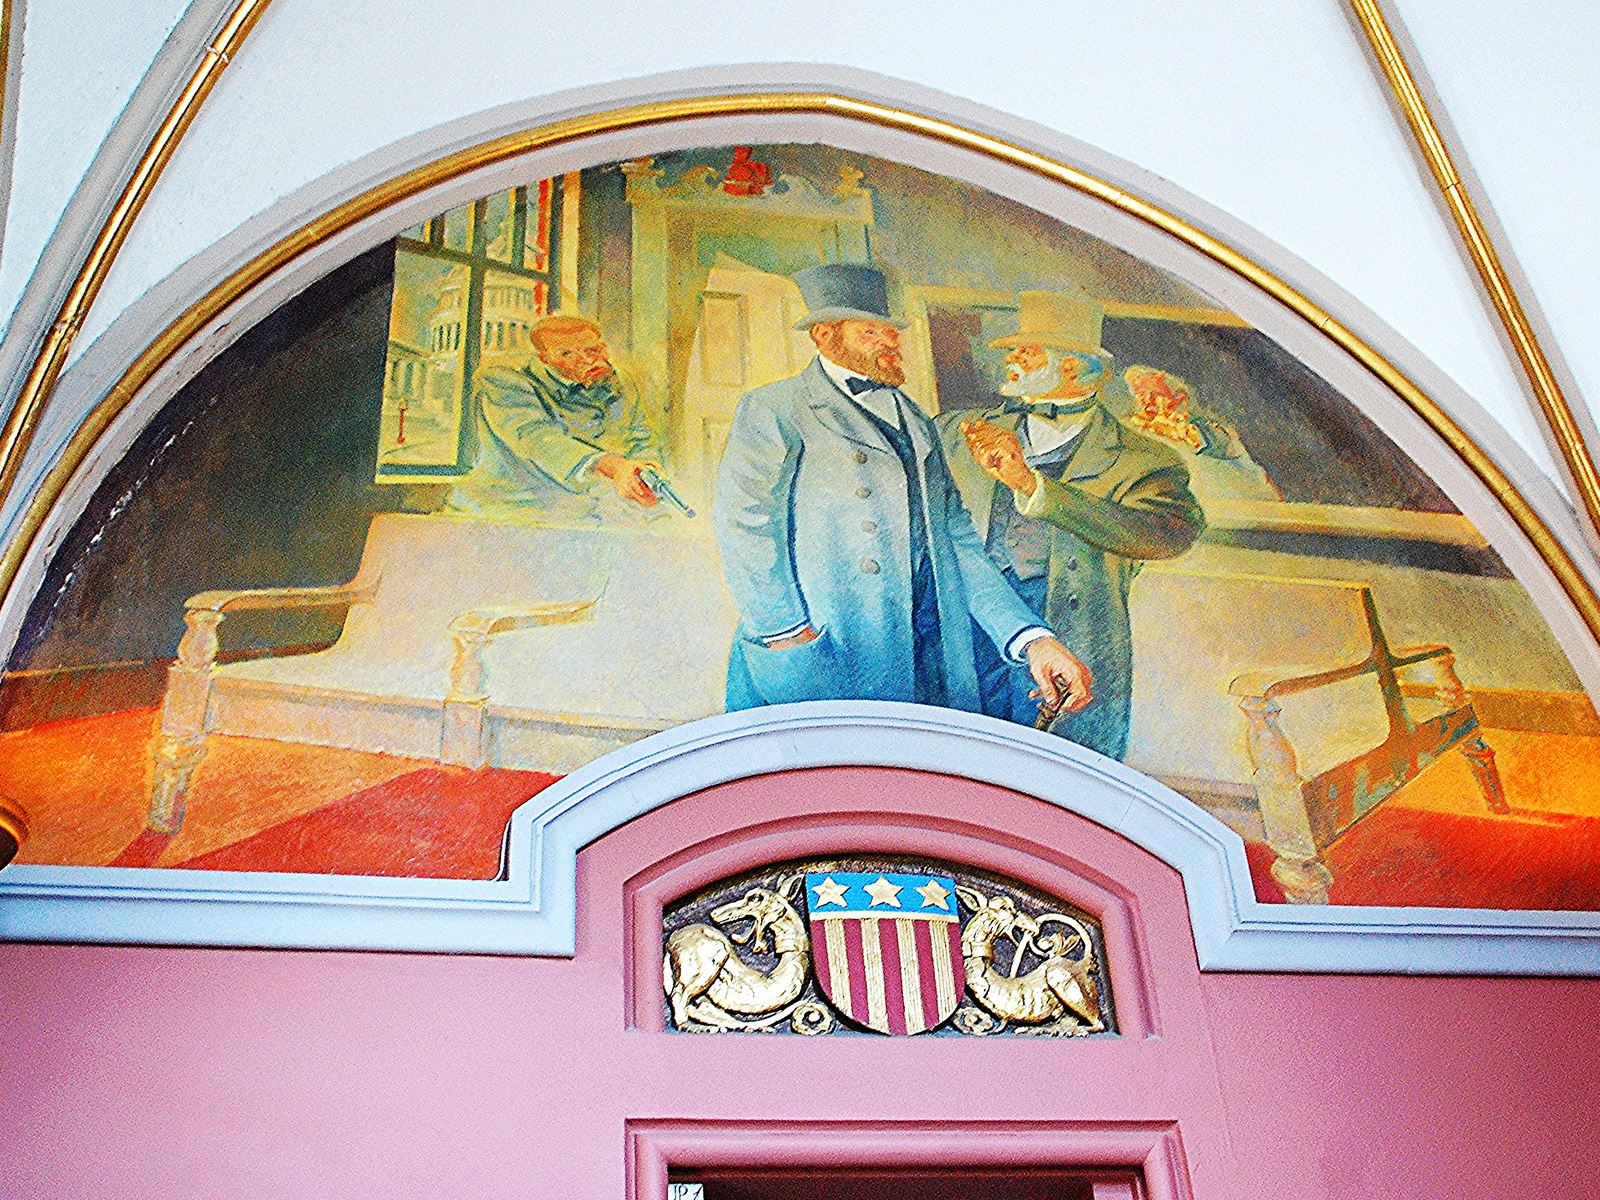 A mural depicting the assassination of James A. Garfield, found inside the Garfield tomb in Cleveland, Ohio.